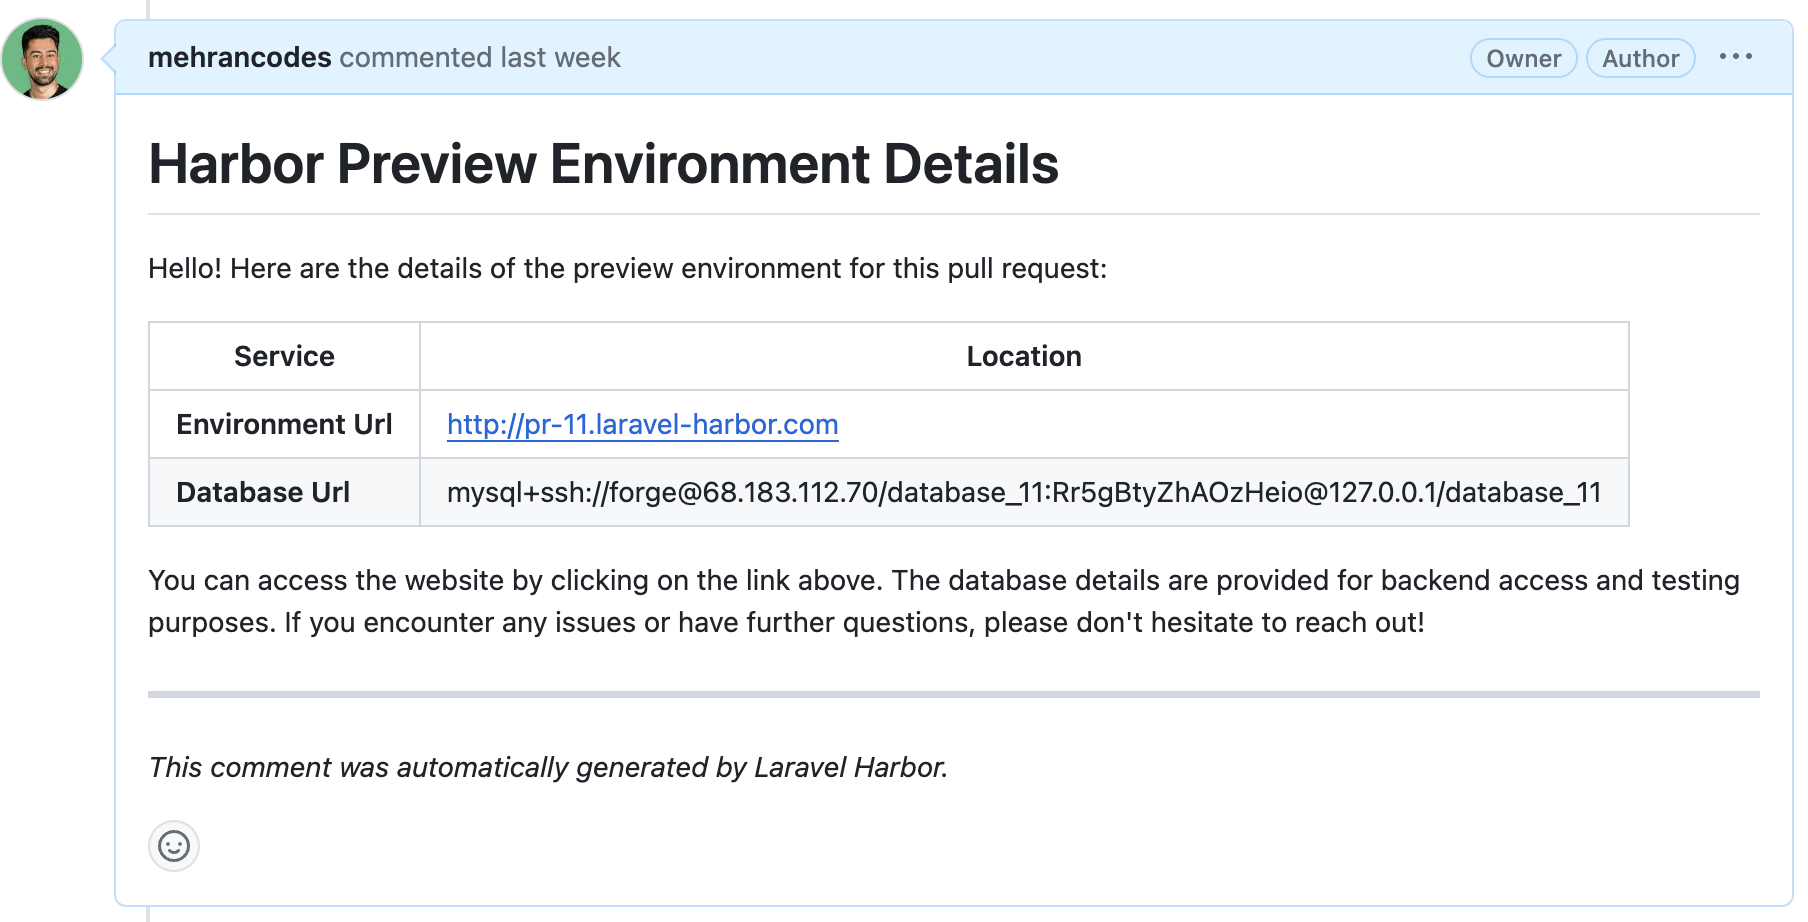 Harbor site info comment on pull requests